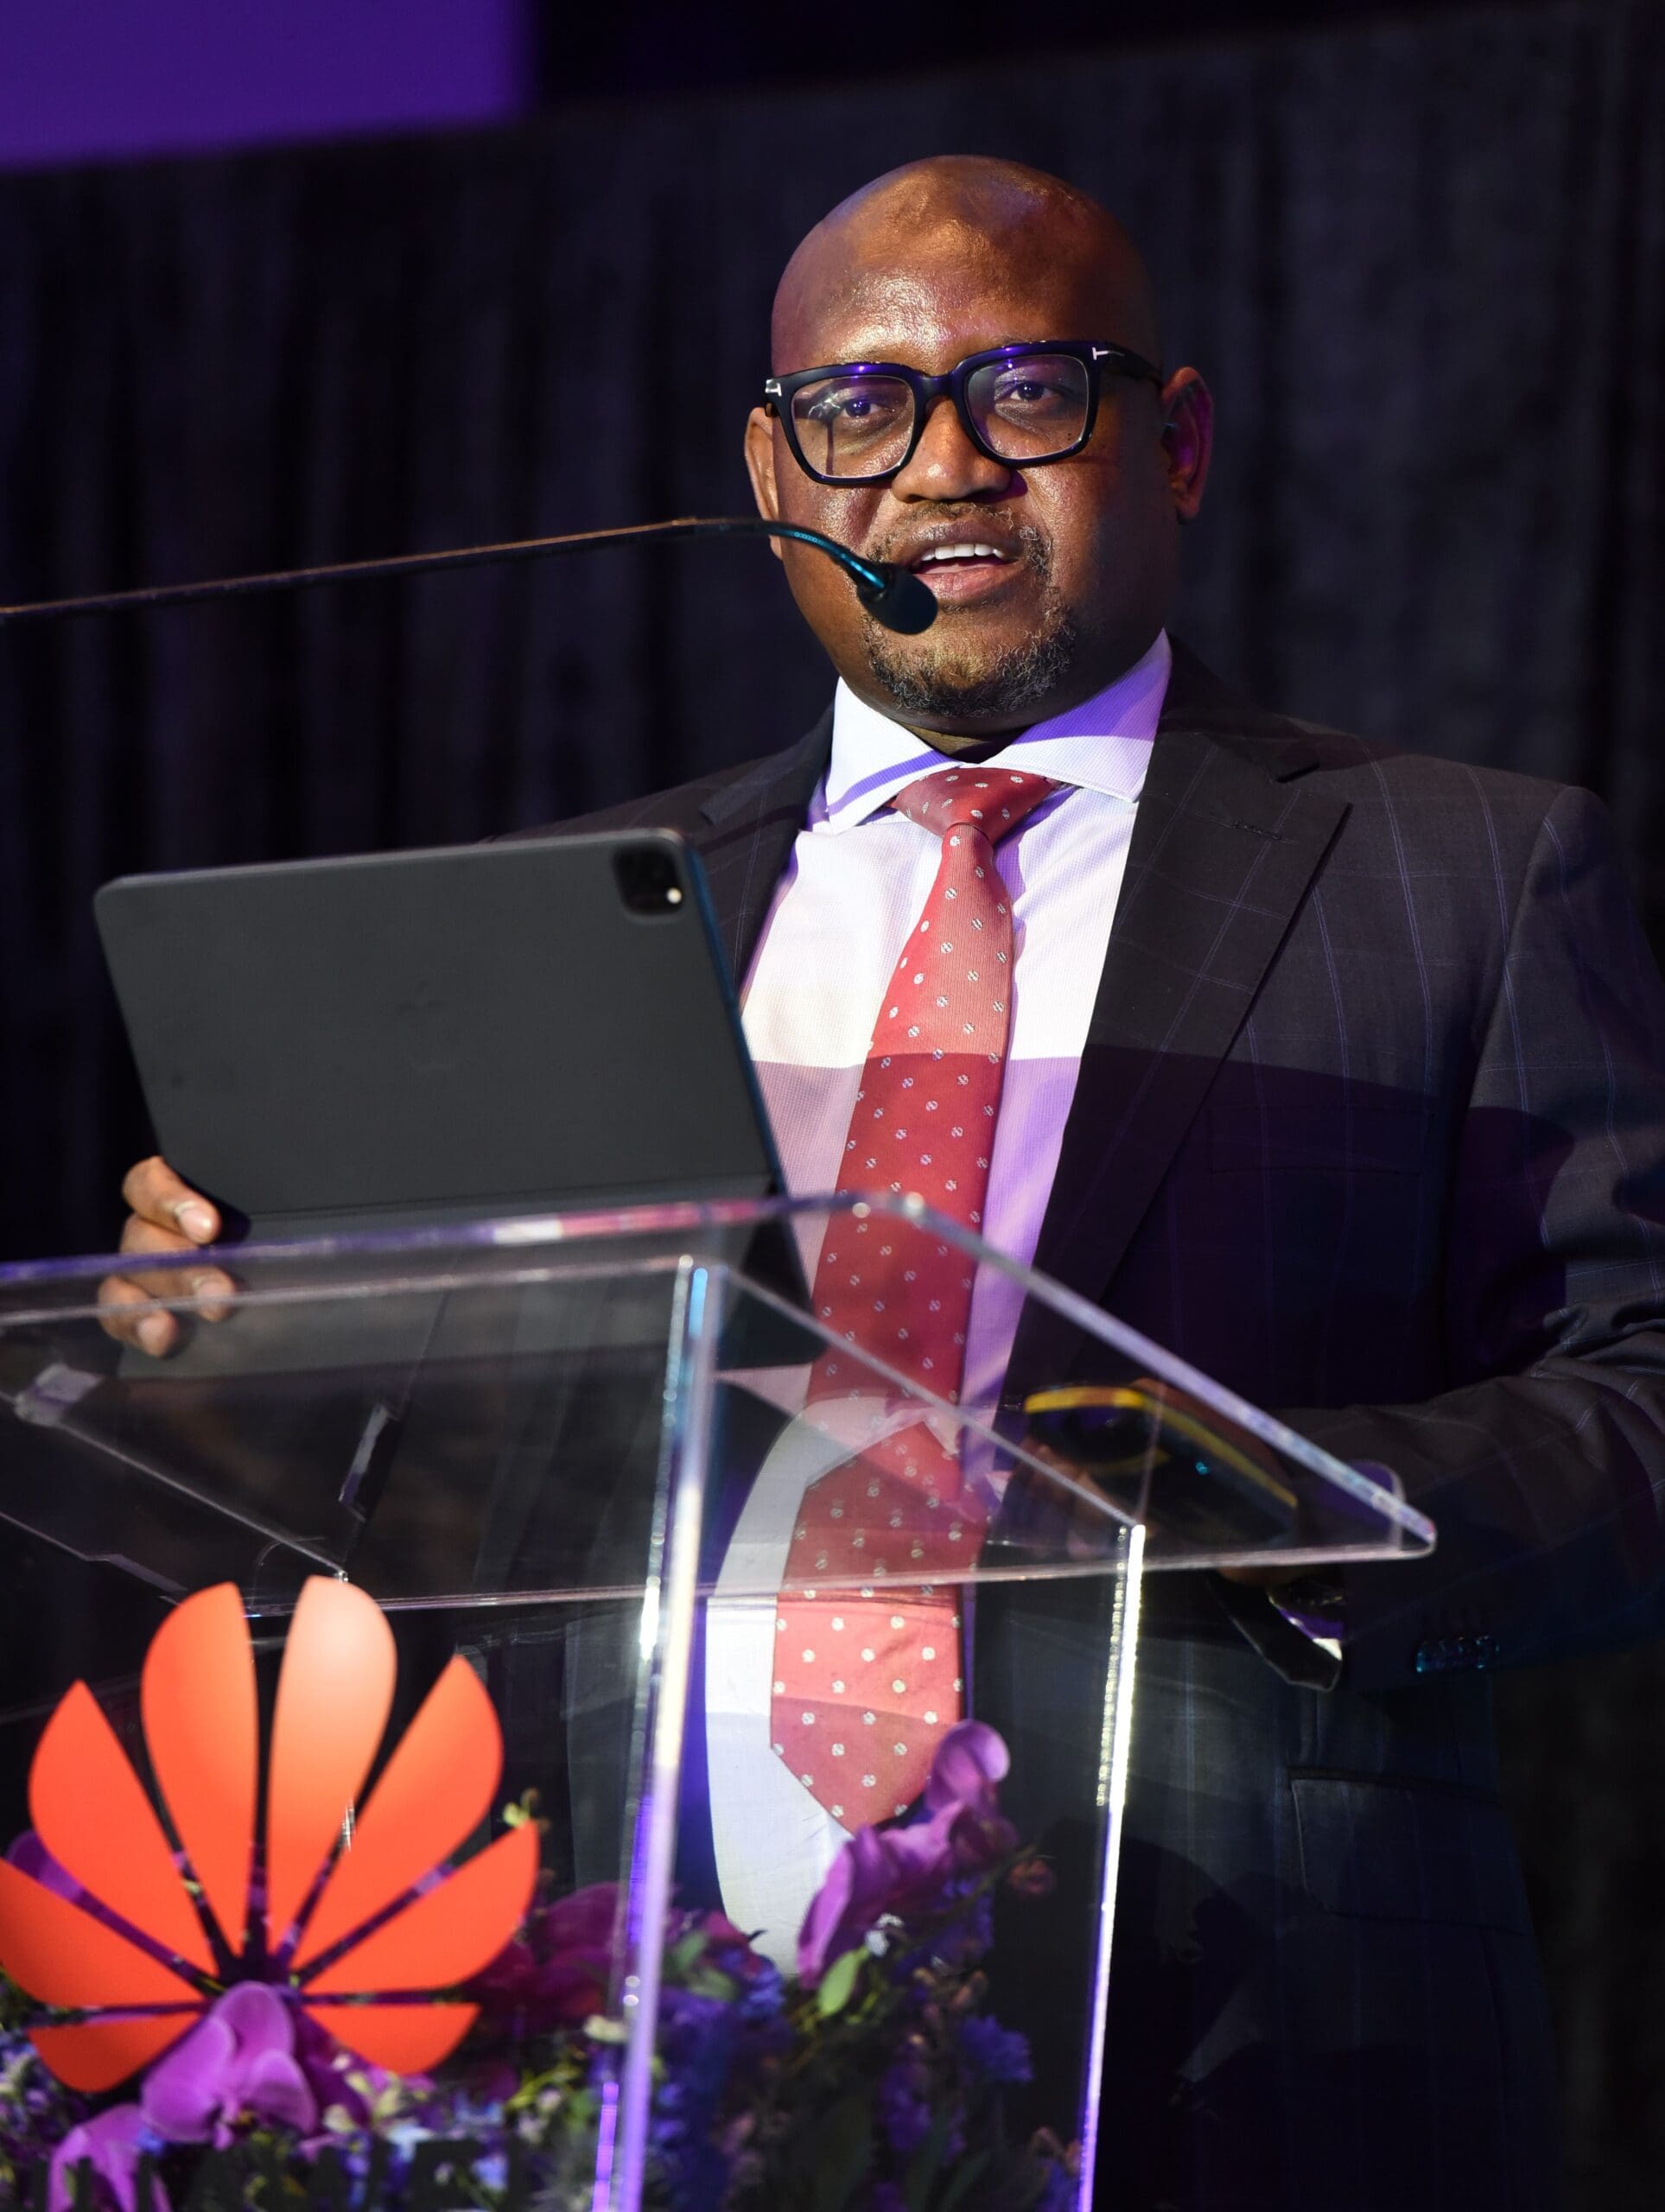 Philly Mapulane, Deputy Minister, Department of Communications and Digital Technologies